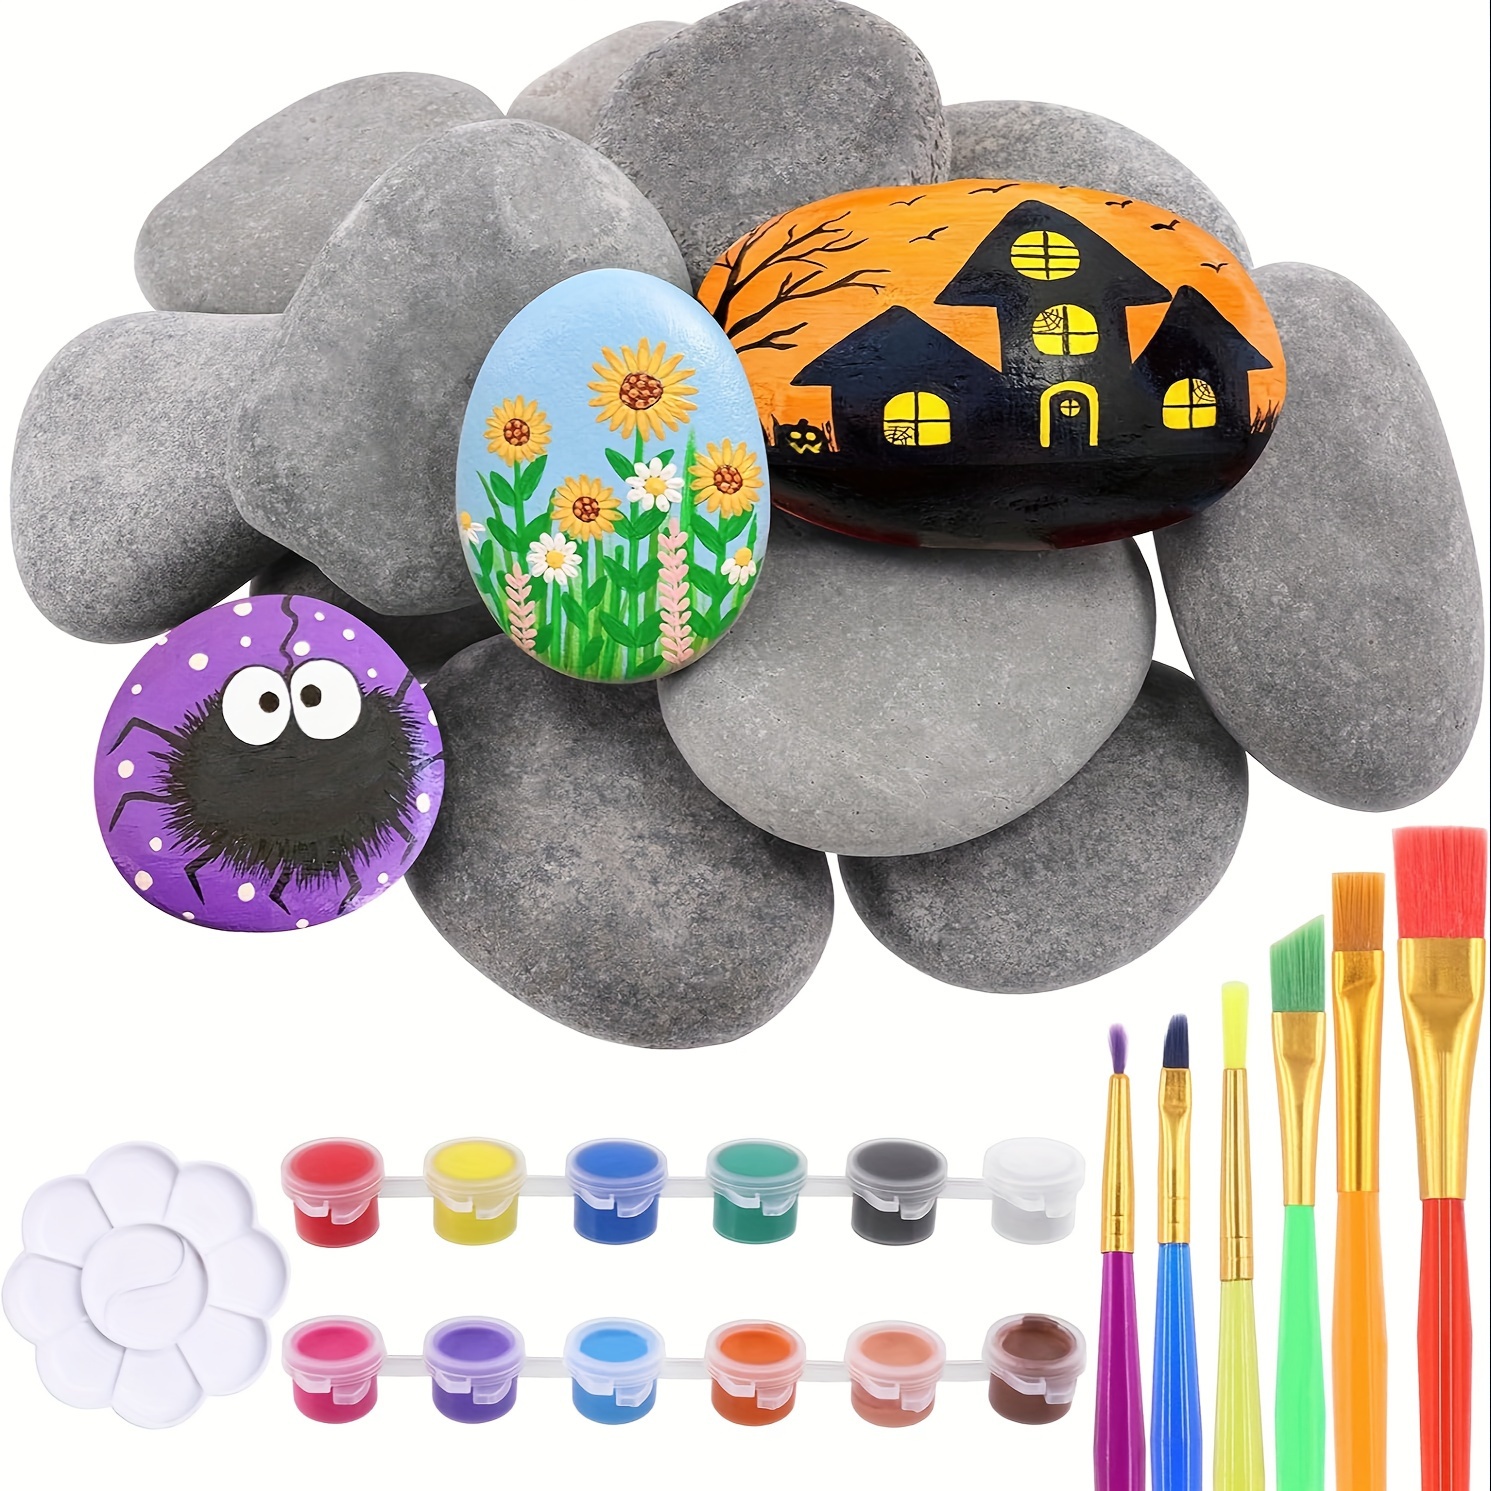 Bright Creations 20 Pack Flat Rocks for Painting, Craft Kindness Stones for Kids Arts, River Pebbles DIY (2-3 in)